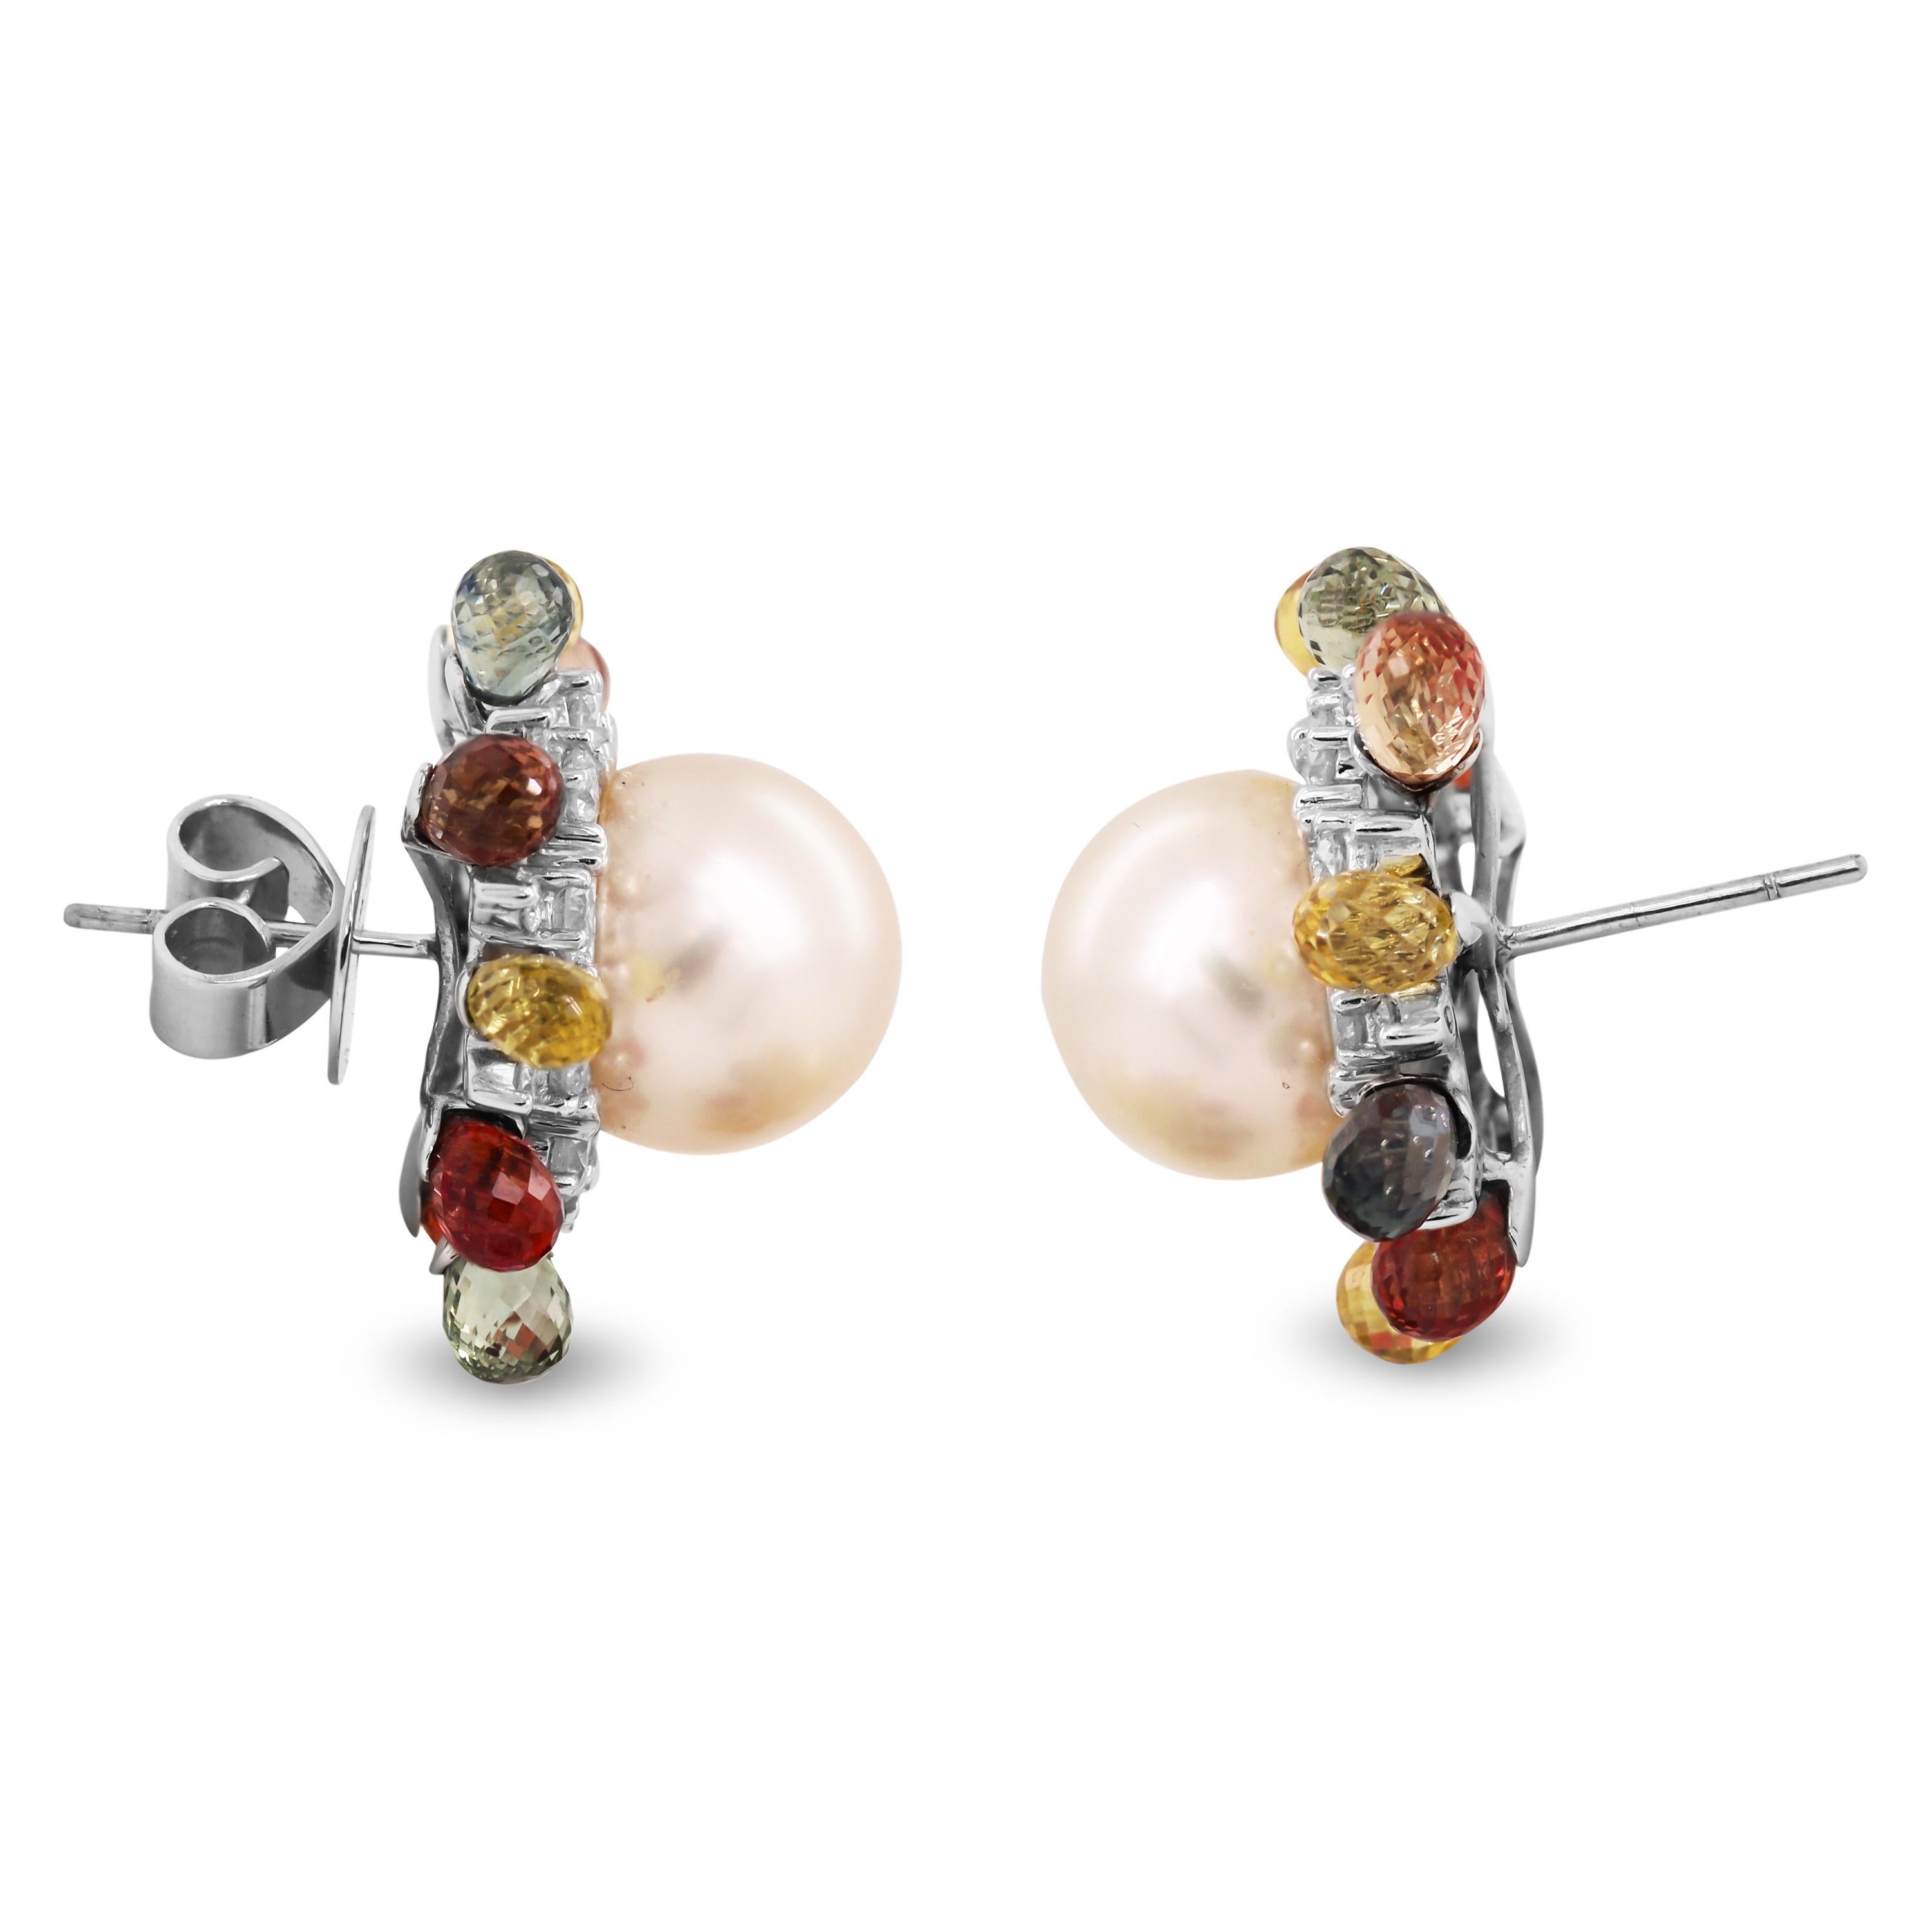 11mm Round Pearl Briolette Sapphires 18K White Gold Stud Earrings

Two Pearls, 11.4mm each on the center of each earring.

1.60ct. total weight Diamonds surround pearl 

4.00ct. apprx. Multi-Color Briolette Sapphires

1 inch width. Stud earrings